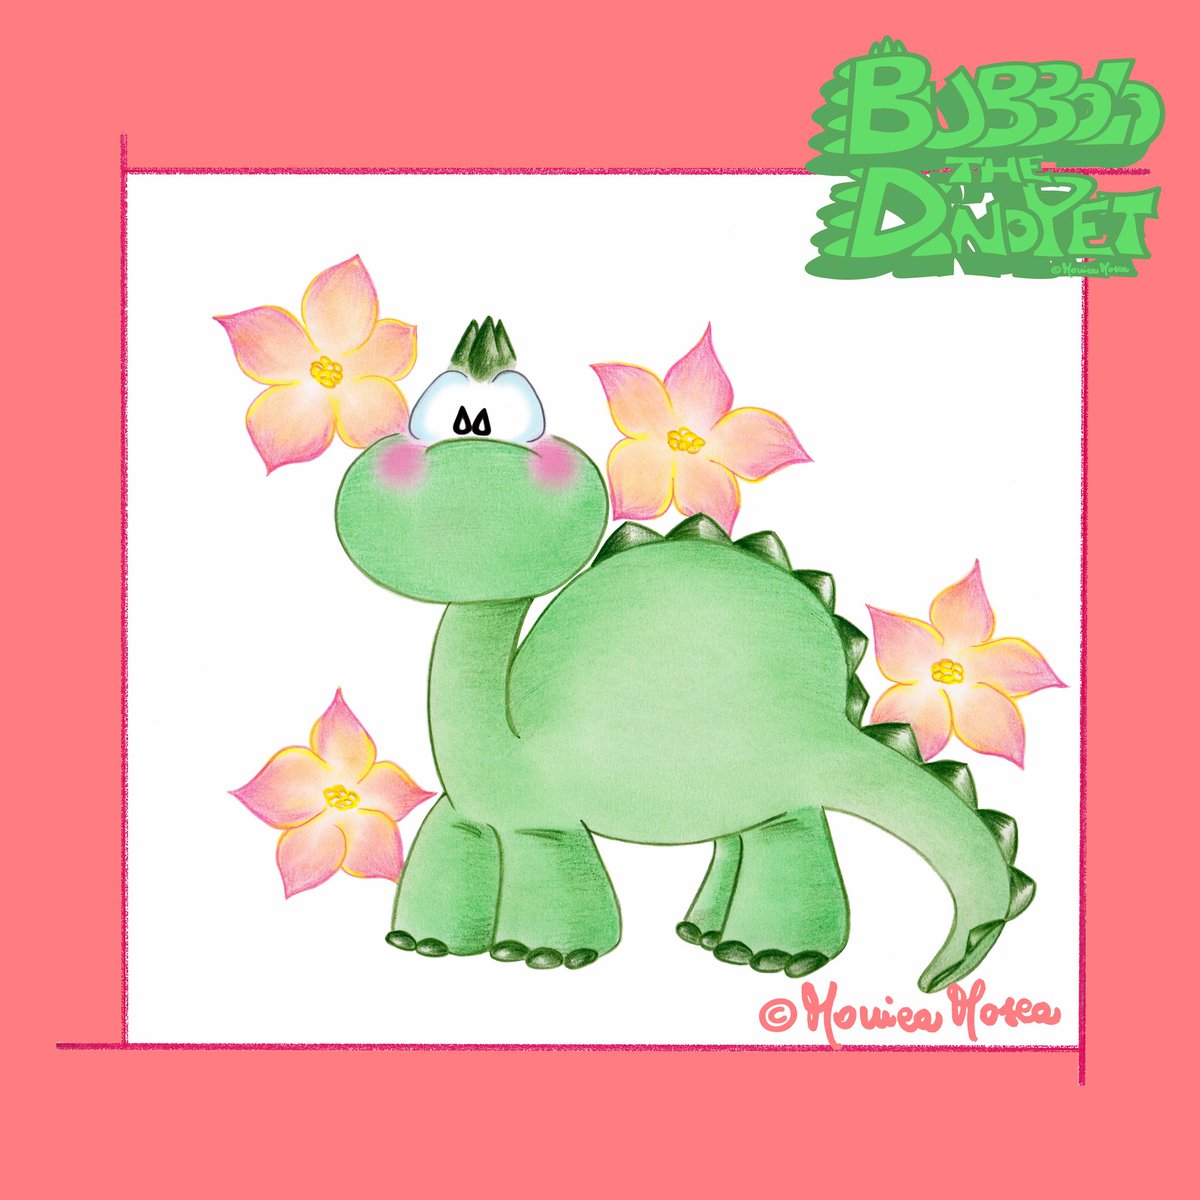 Have a nice Sunday 💖 please #stayathome & #besafe enjoying small little things of life: reading 📚, listening to good music🎧, baking your fave cake🥧, hugging your sweet dino pet 🦕 💕
#BubboloTheDinoPet #Bubbolo #originalart #traditionalart #pencildrawing #dinosaurdrawing